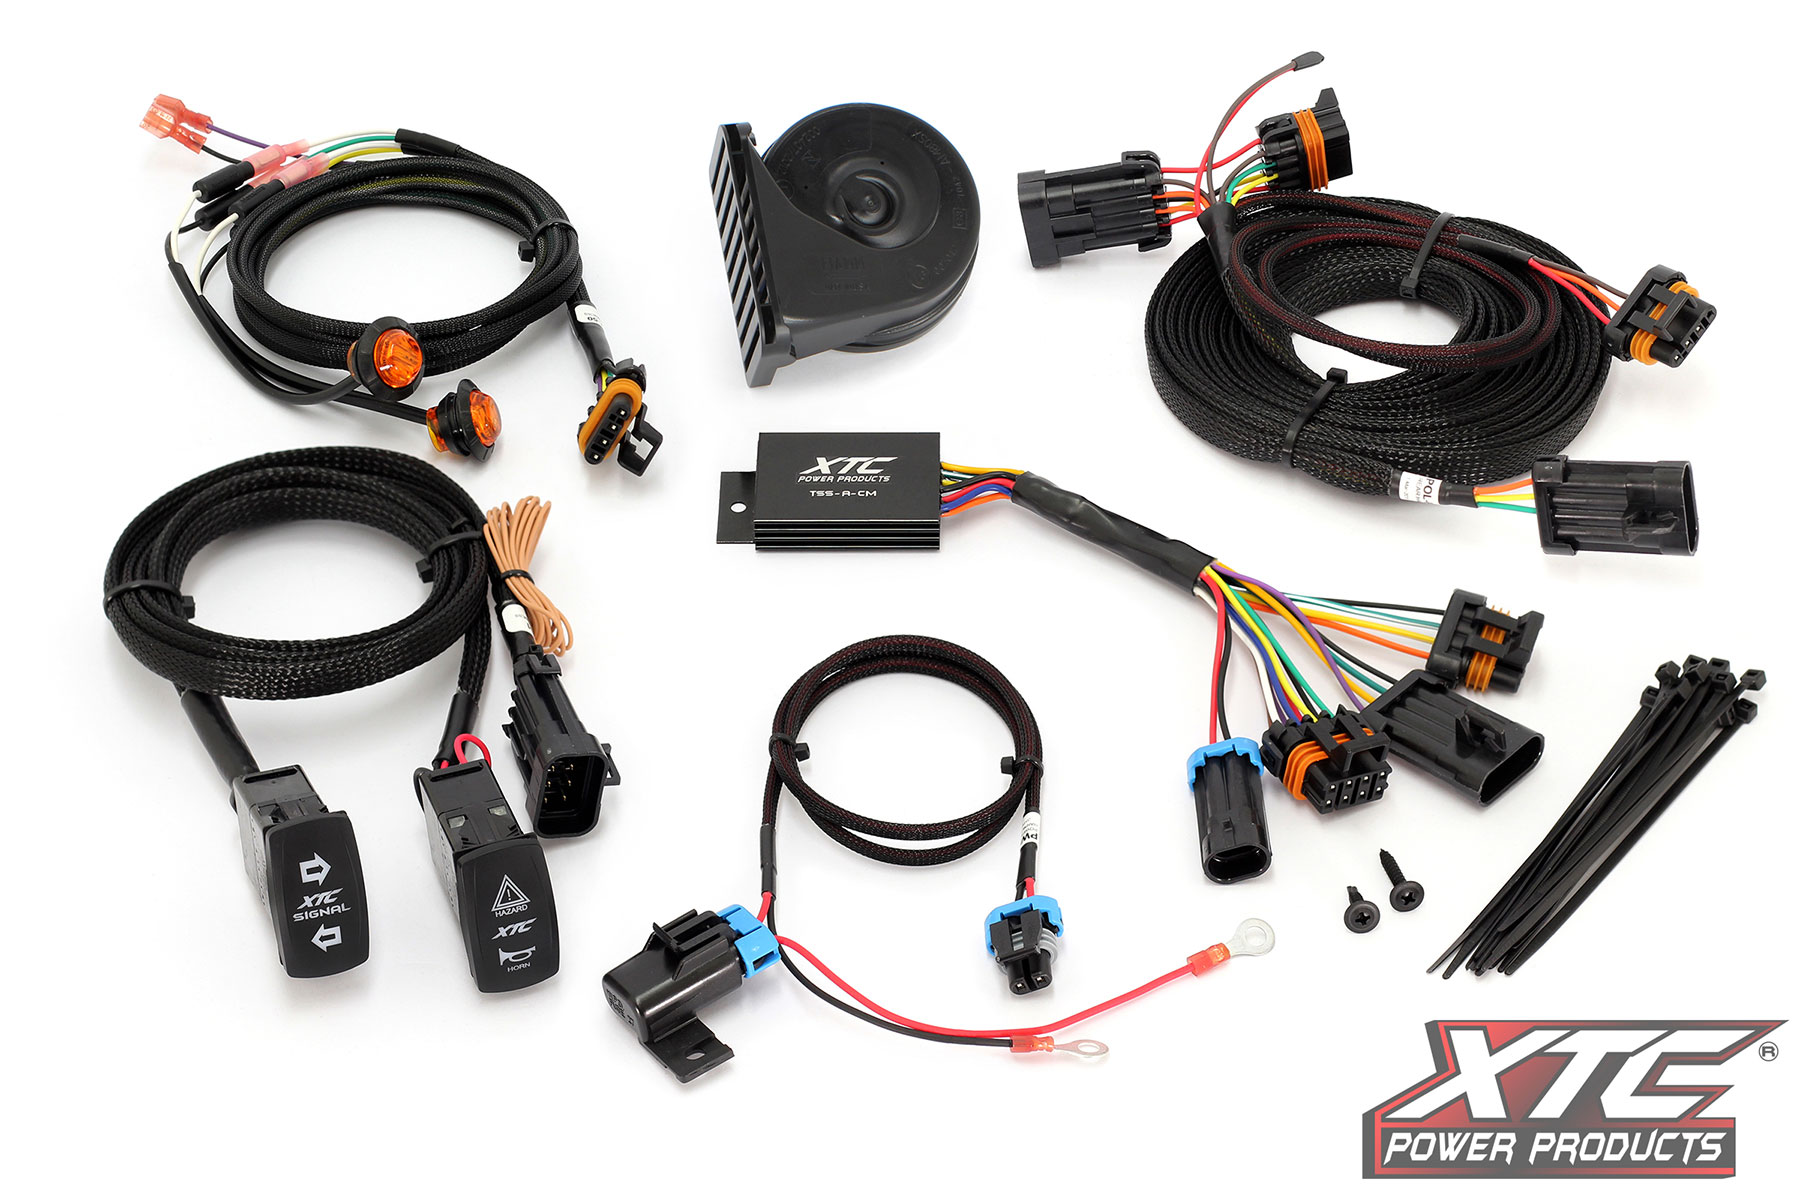 XTC Power Products Polaris RZR Turbo S and 19 XP 1000 Turbo Self Canceling Turn Signal System with Horn 1